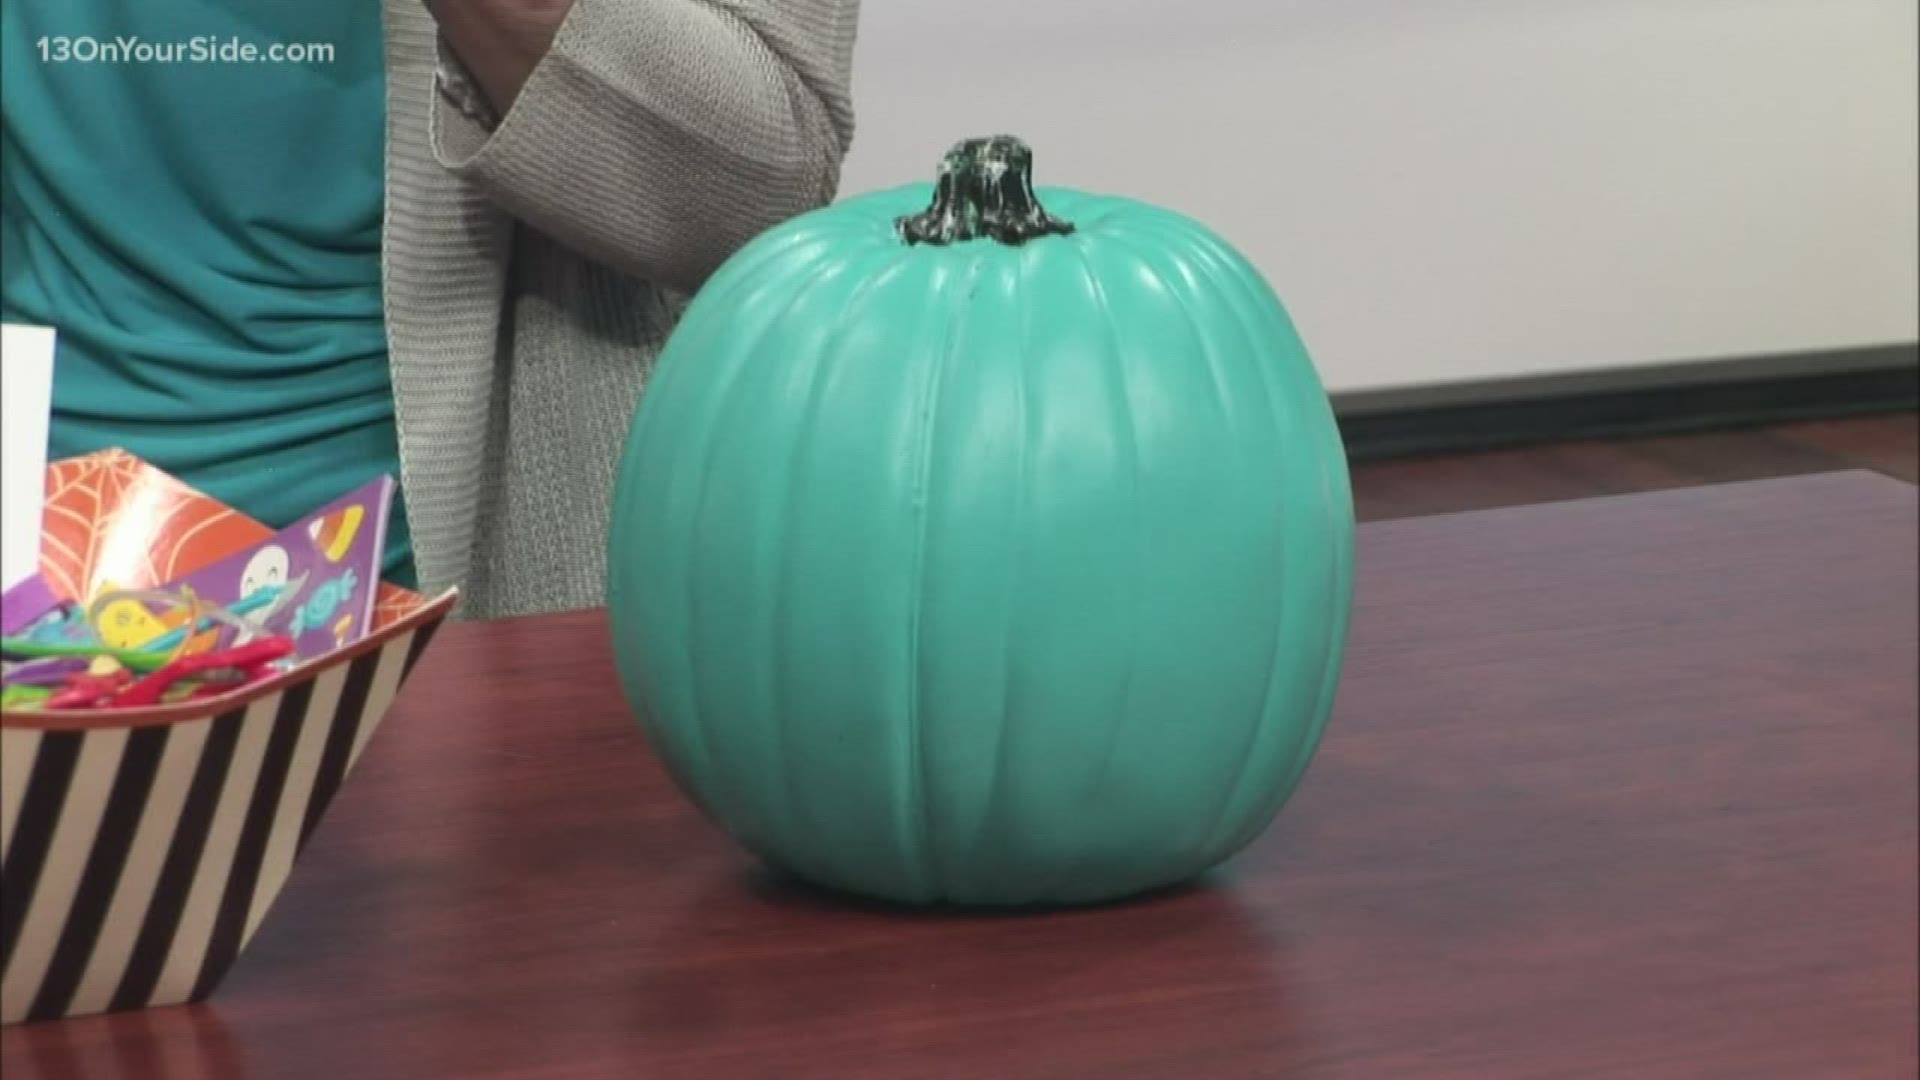 Halloween can be a fun night for kids. But for children with allergies, it can feel not very inclusive. That's where the Teal Pumpkin Project comes in.